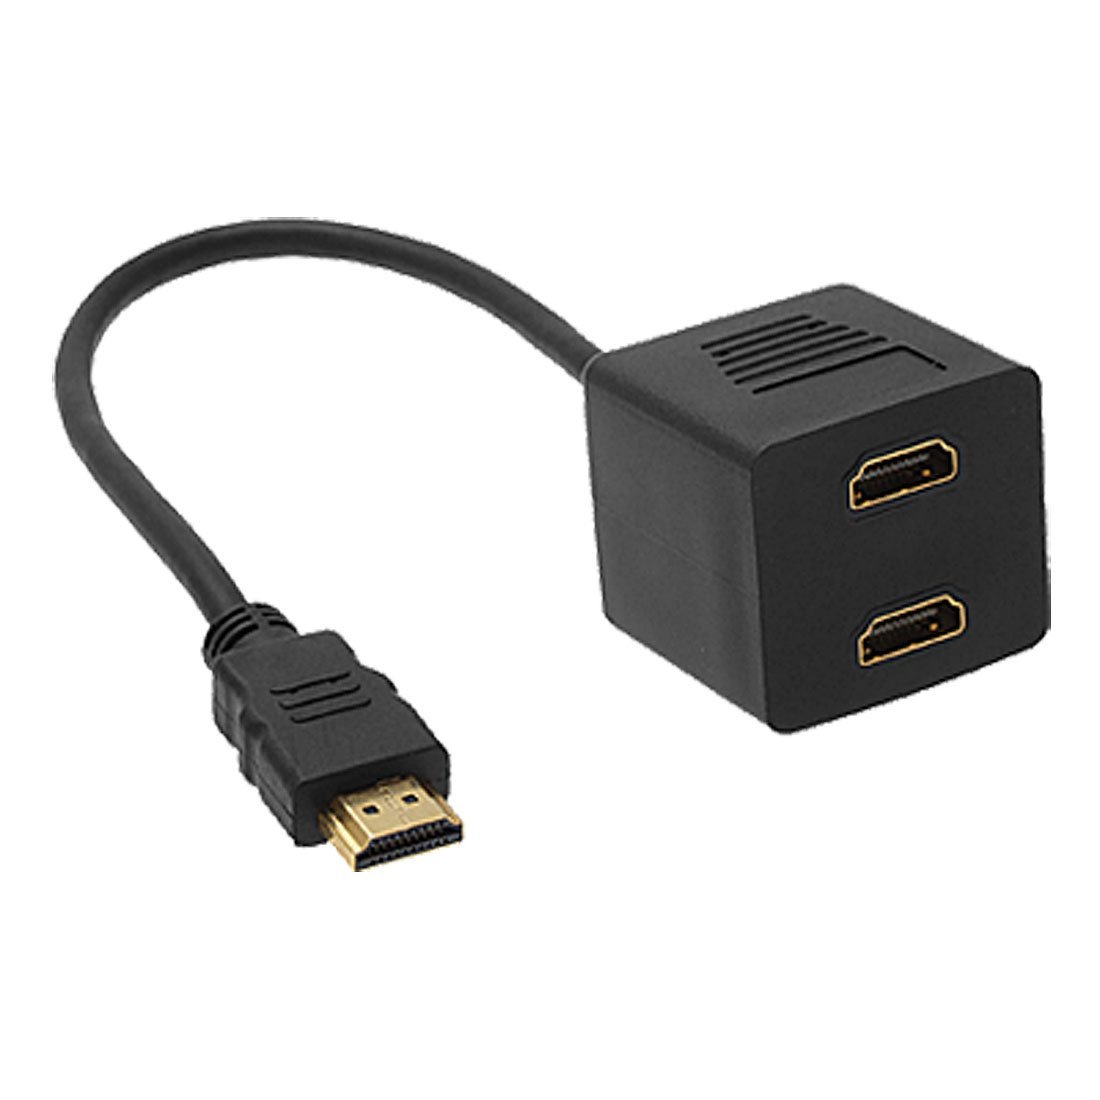 hdmi splitter for sound and video